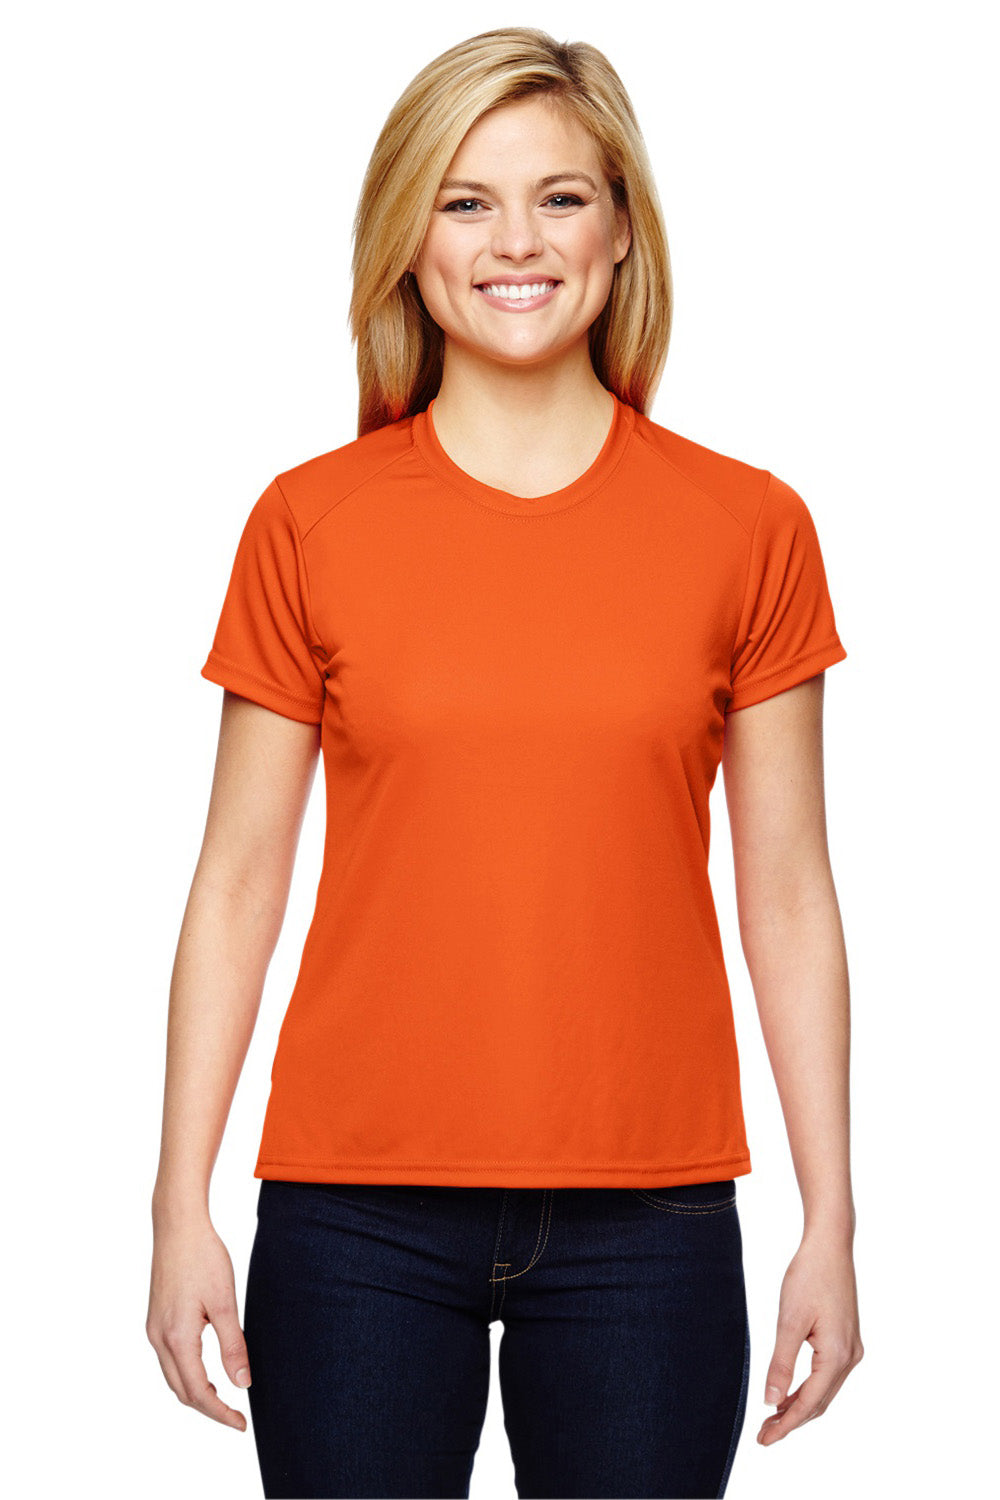 A4 NW3201 Womens Cooling Performance Moisture Wicking Short Sleeve Crewneck T-Shirt Orange Front